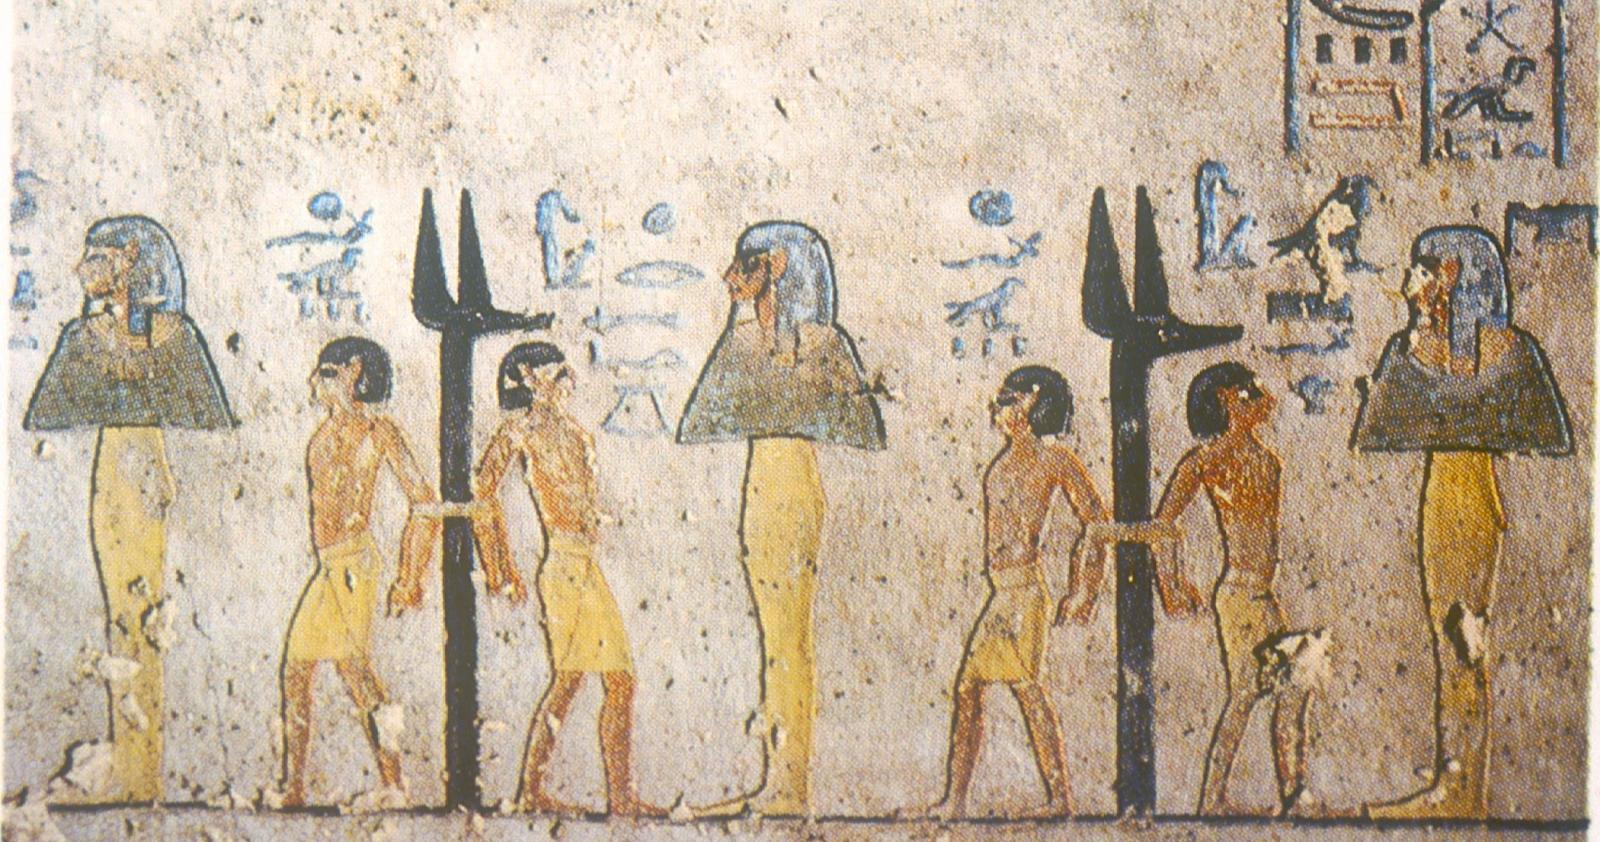 The seventh hour of the Book of Gates in the tomb of Rameses III.